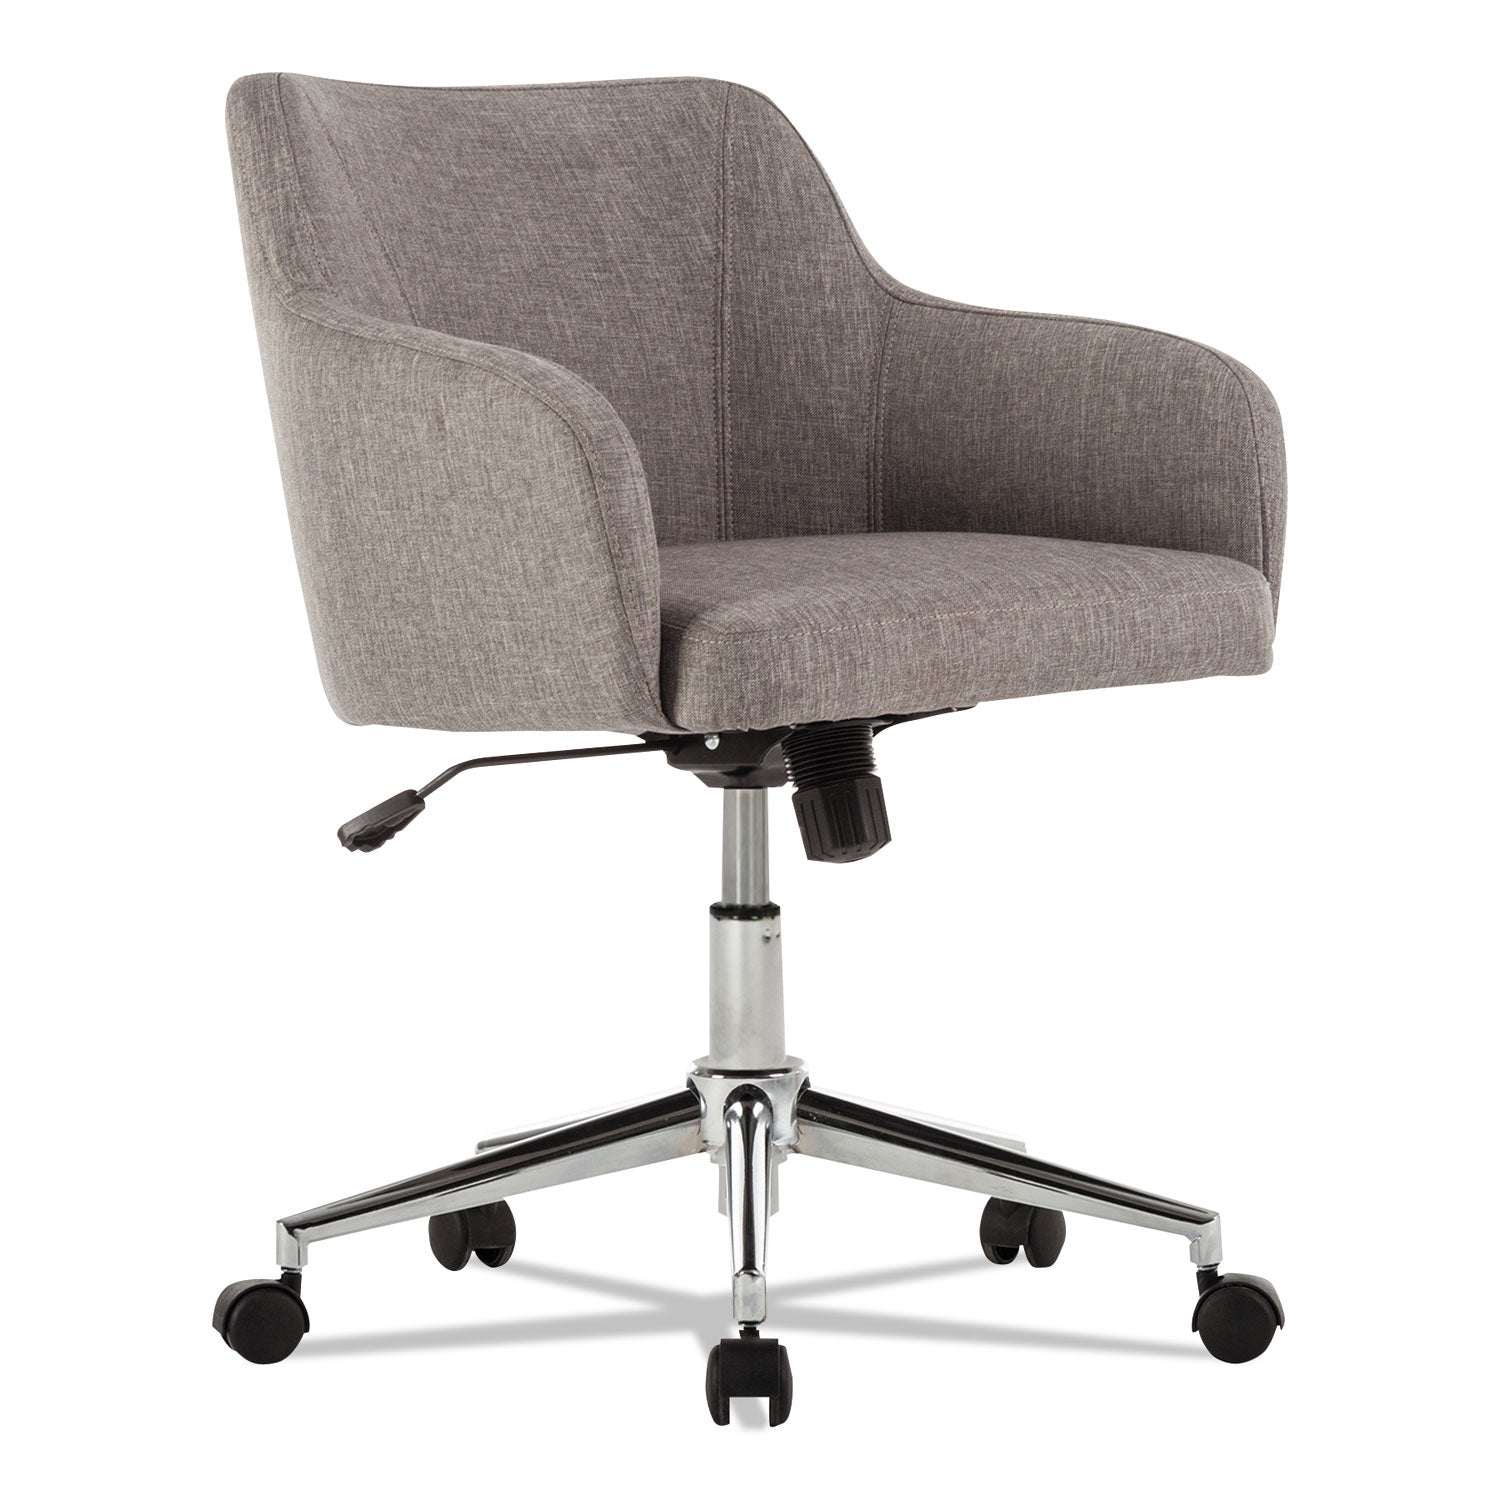 alera-captain-series-mid-back-chair-supports-up-to-275-lb-175-to-205-seat-height-gray-tweed-seat-back-chrome-base_alecs4251 - 1